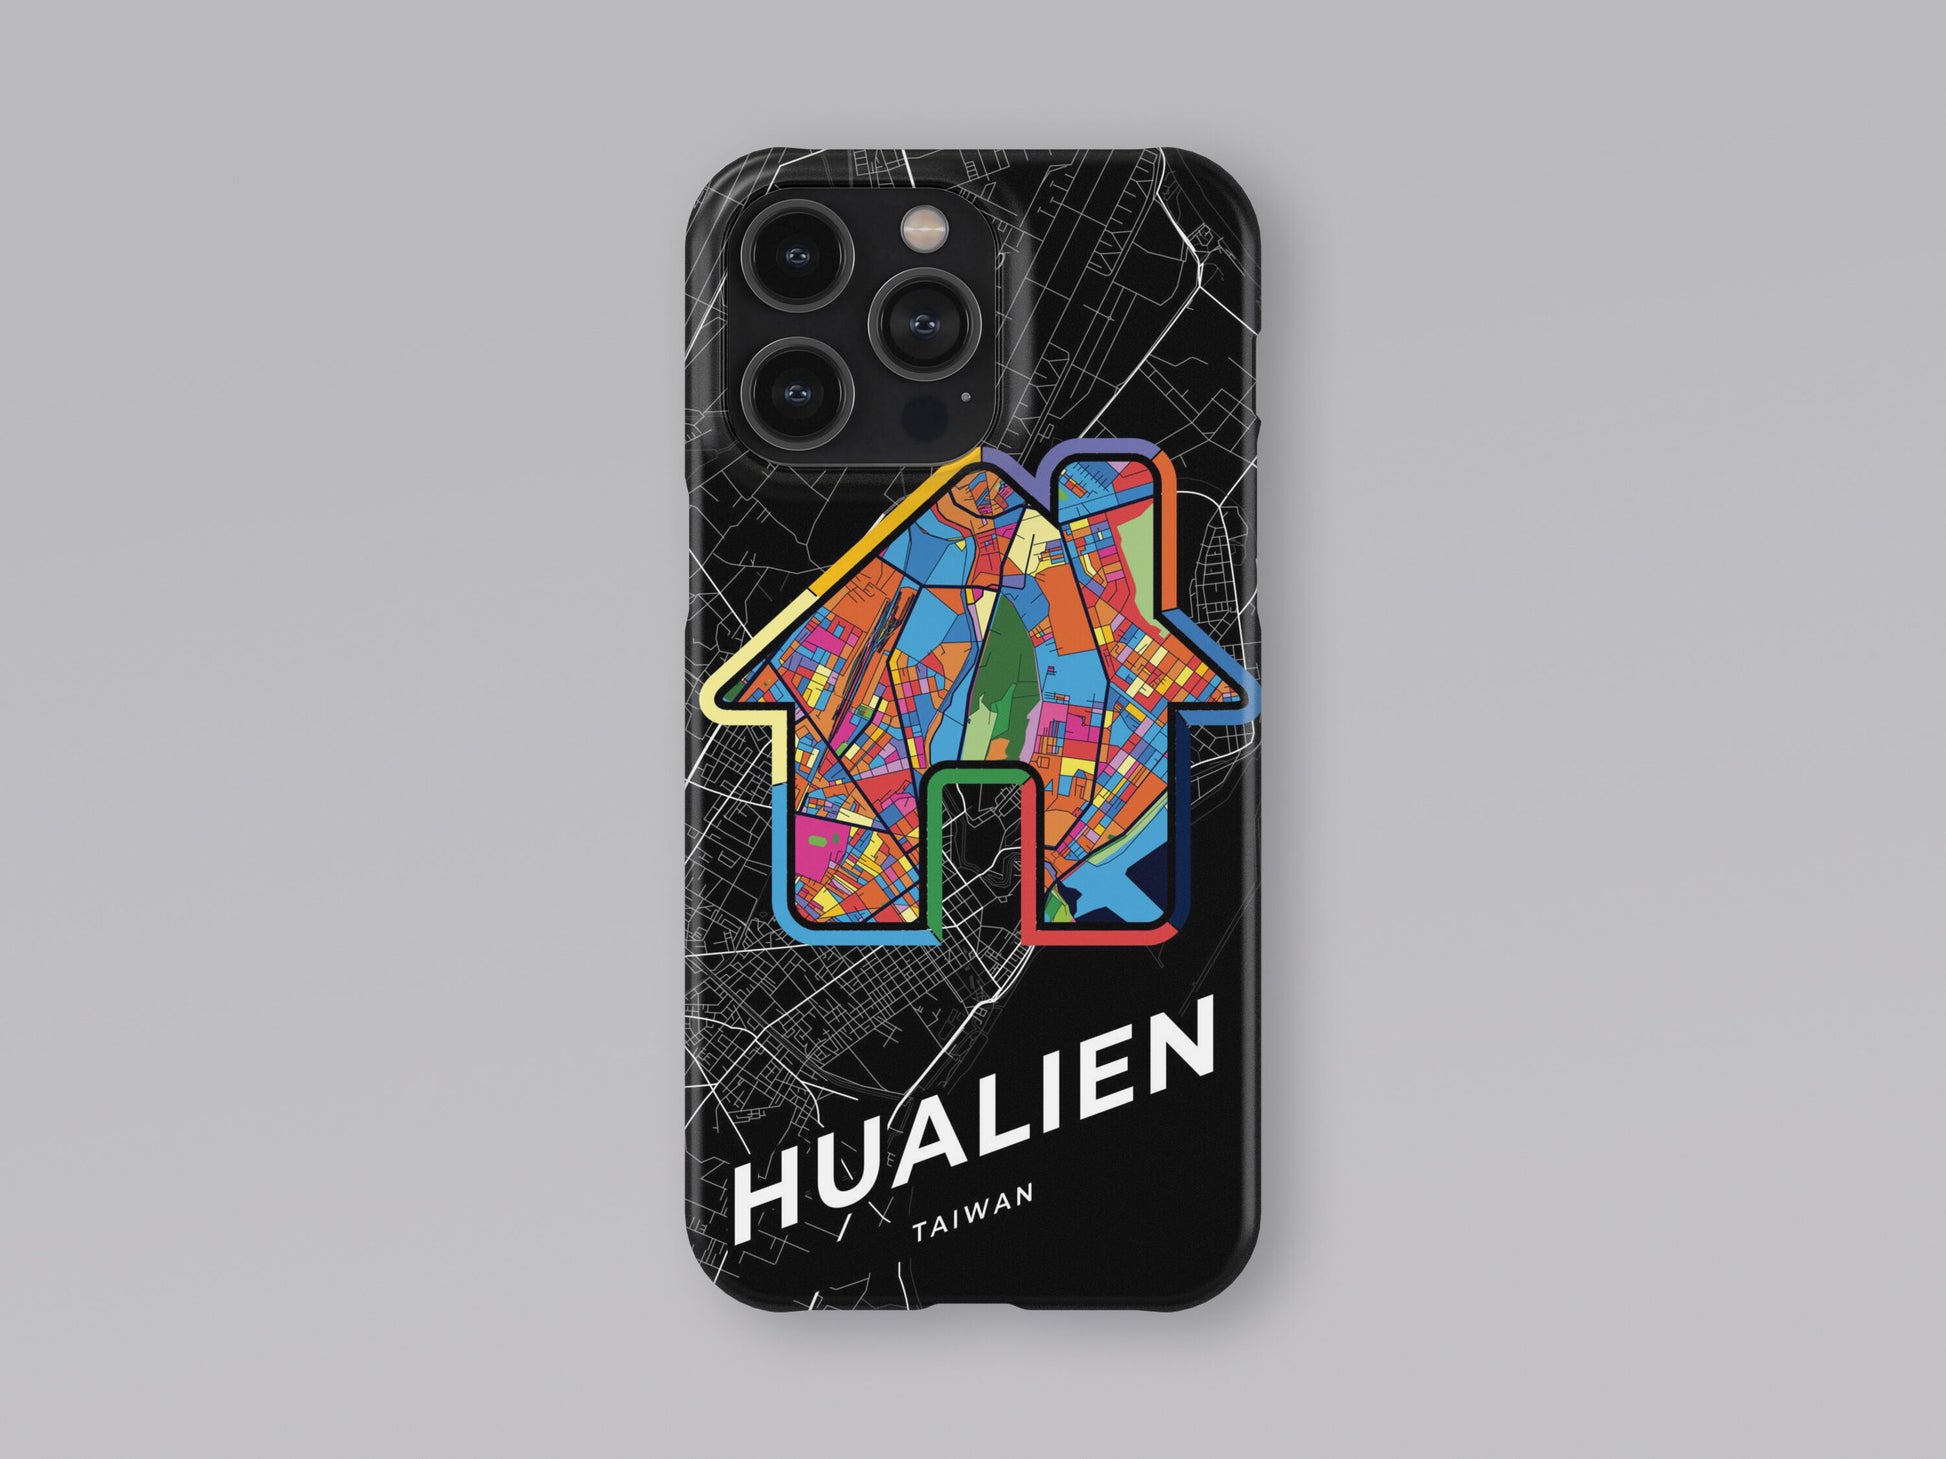 Hualien Taiwan slim phone case with colorful icon. Birthday, wedding or housewarming gift. Couple match cases. 3